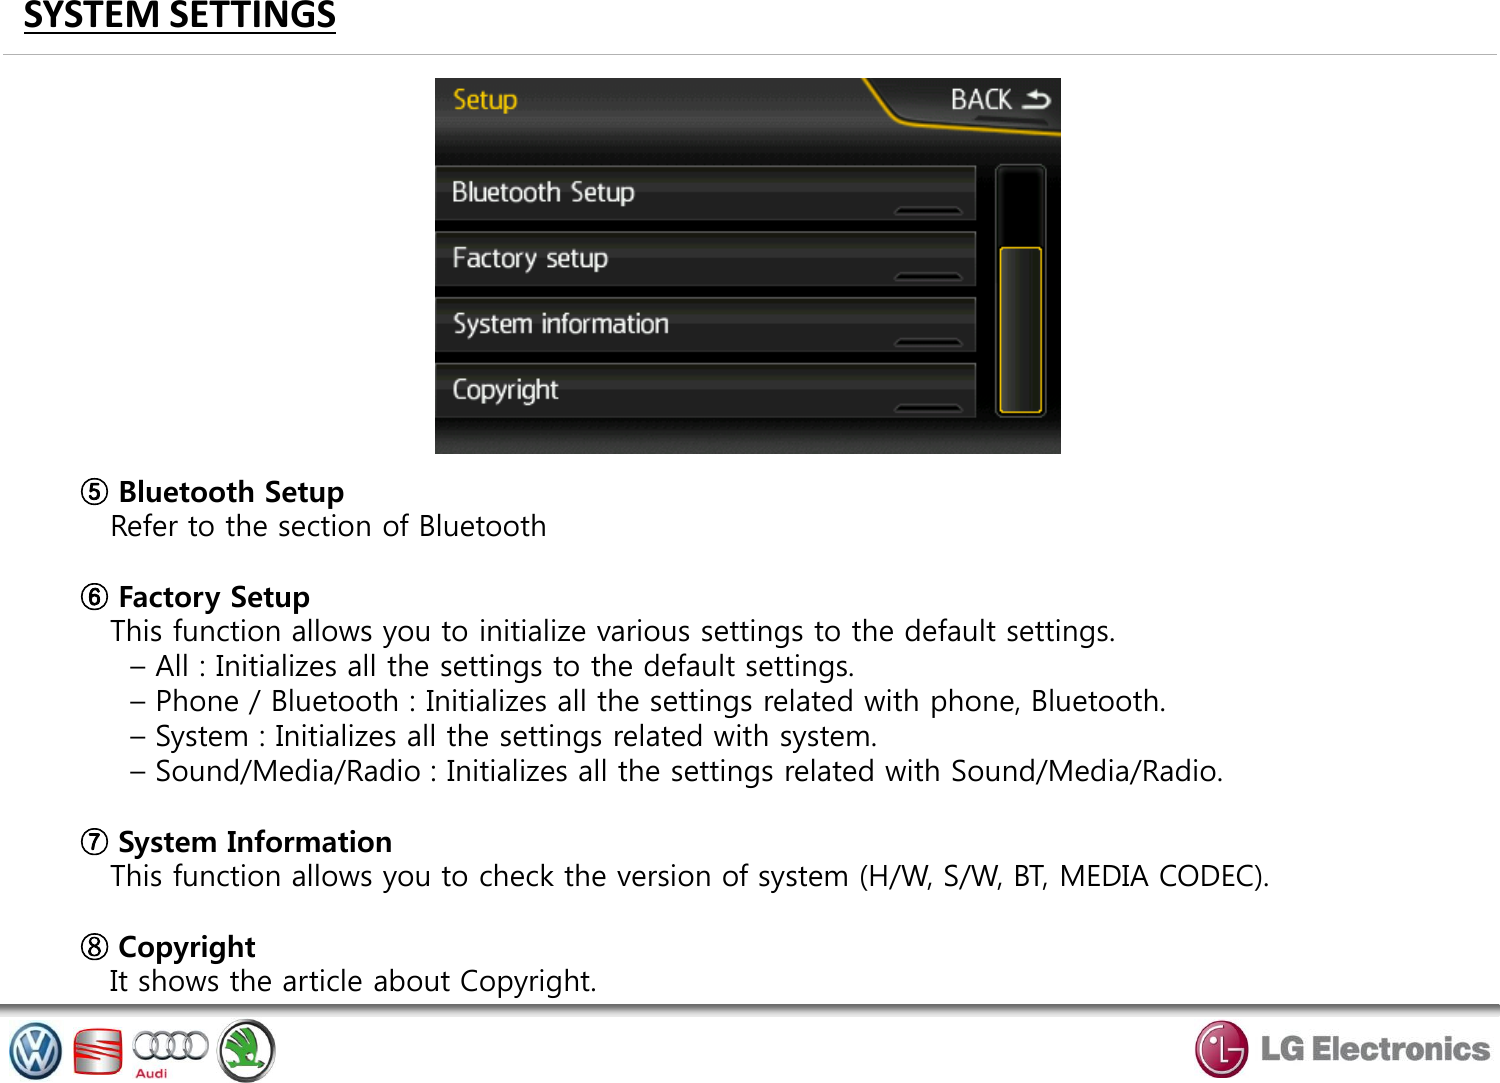 SYSTEM SETTINGS ⑤ Bluetooth Setup    Refer to the section of Bluetooth  ⑥ Factory Setup    This function allows you to initialize various settings to the default settings.      – All : Initializes all the settings to the default settings.      – Phone / Bluetooth : Initializes all the settings related with phone, Bluetooth.      – System : Initializes all the settings related with system.      – Sound/Media/Radio : Initializes all the settings related with Sound/Media/Radio.  ⑦ System Information    This function allows you to check the version of system (H/W, S/W, BT, MEDIA CODEC).  ⑧ Copyright    It shows the article about Copyright. 